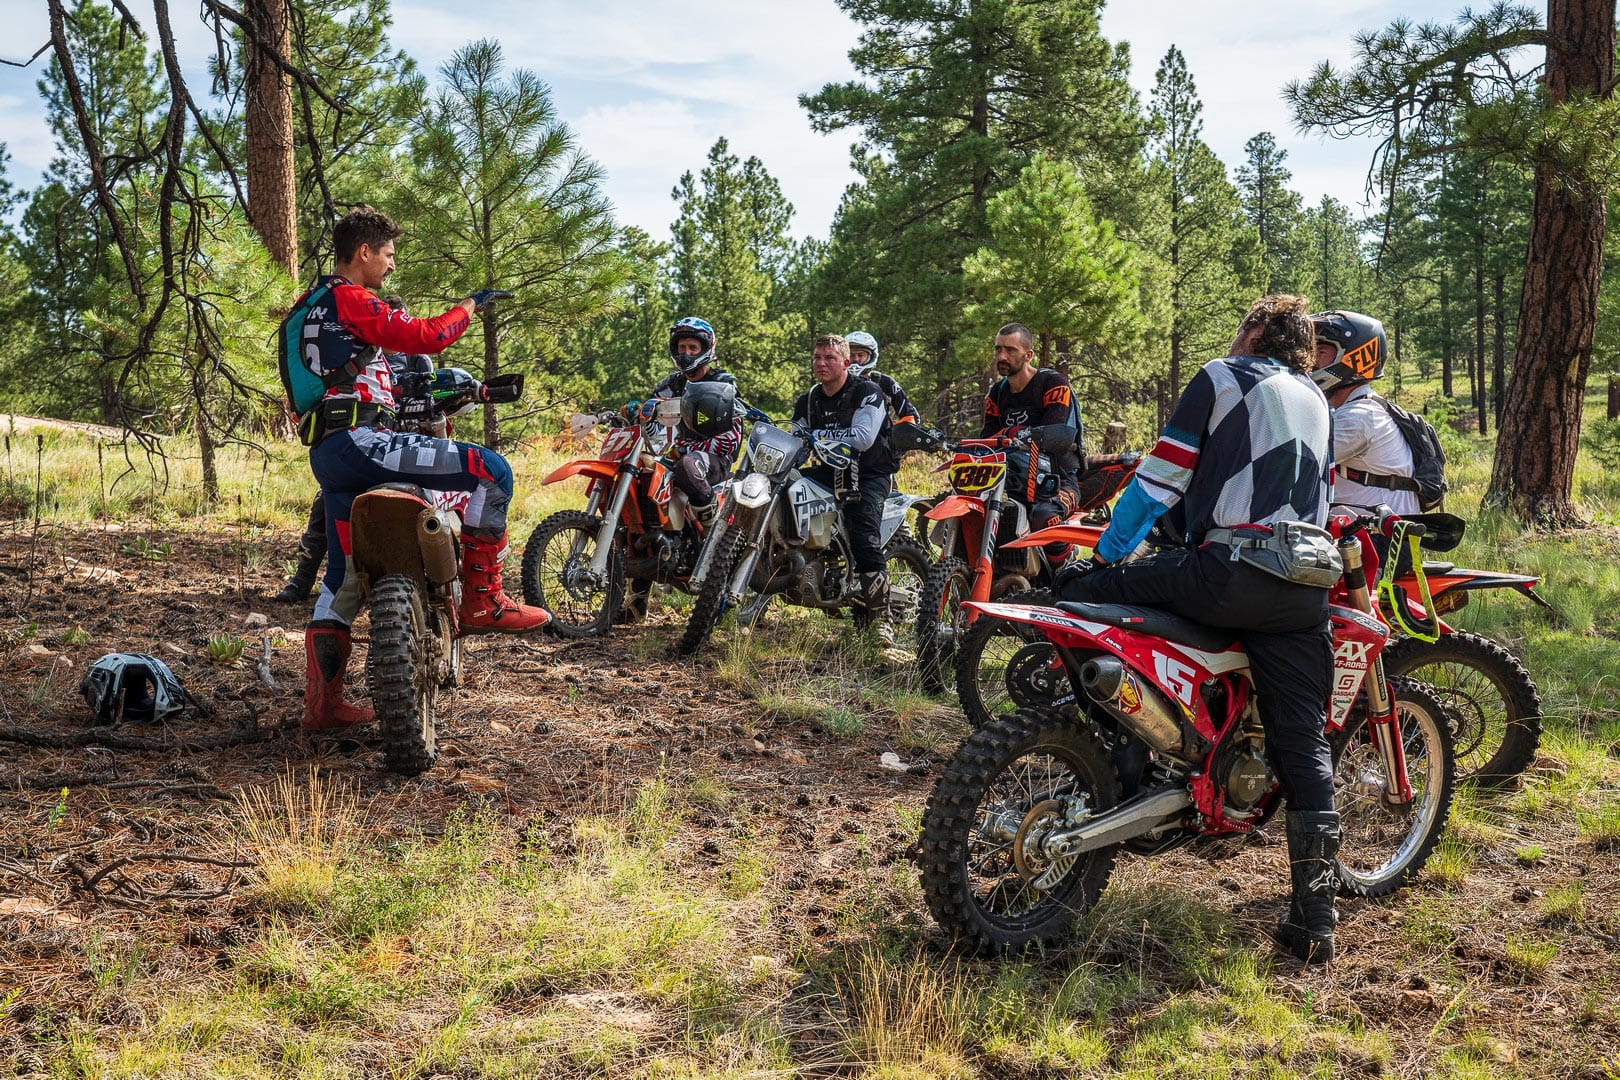 The Coconino Trail Riders meeting in the woods with motorcycles for seats